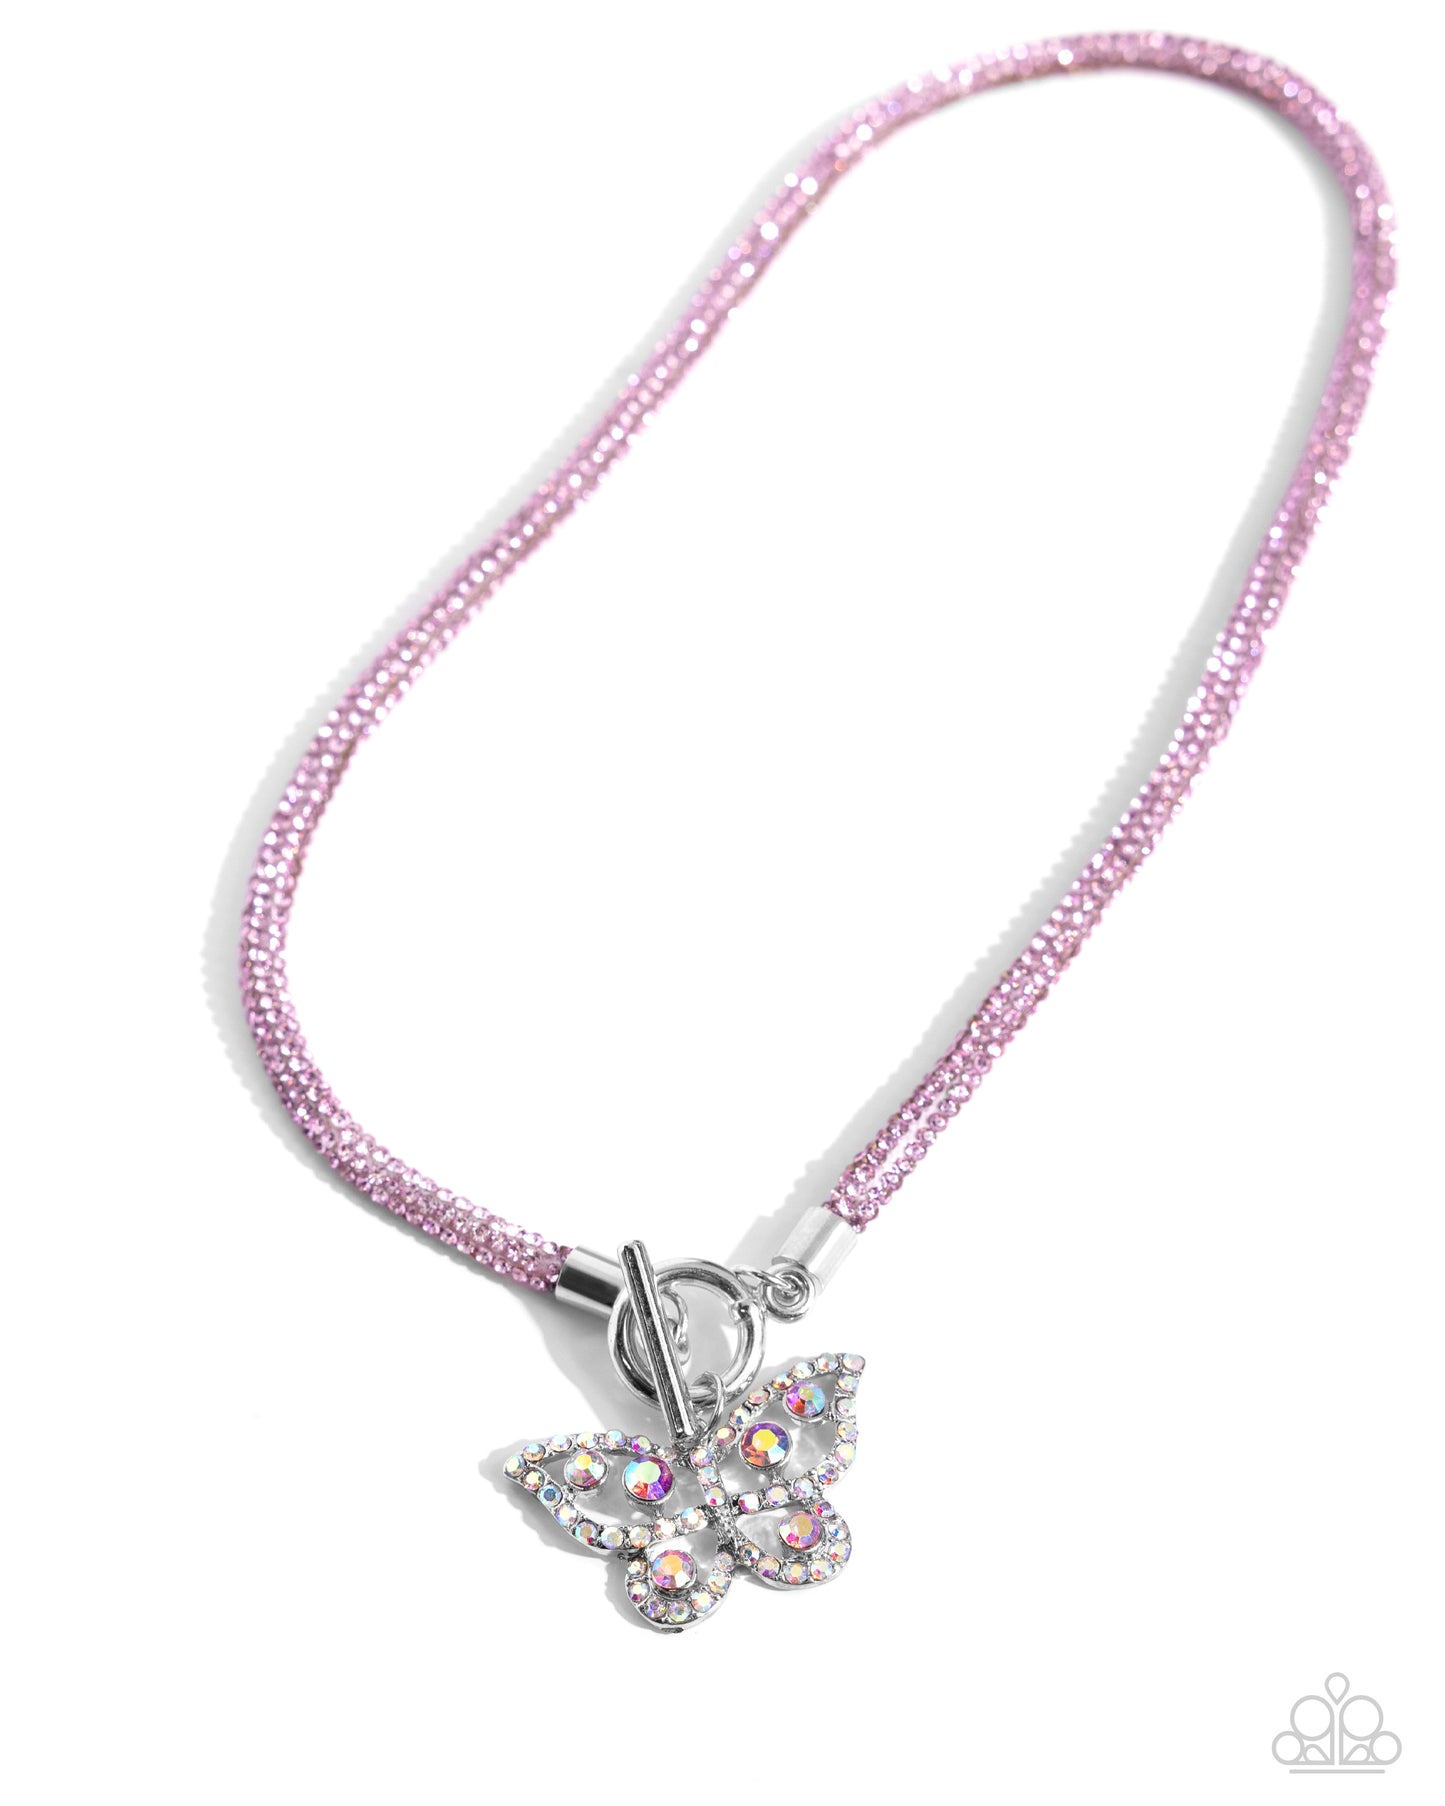 On SHIMMERING Wings Pink Butterfly Toggle Necklace & Bracelet Set - Paparazzi Accessories